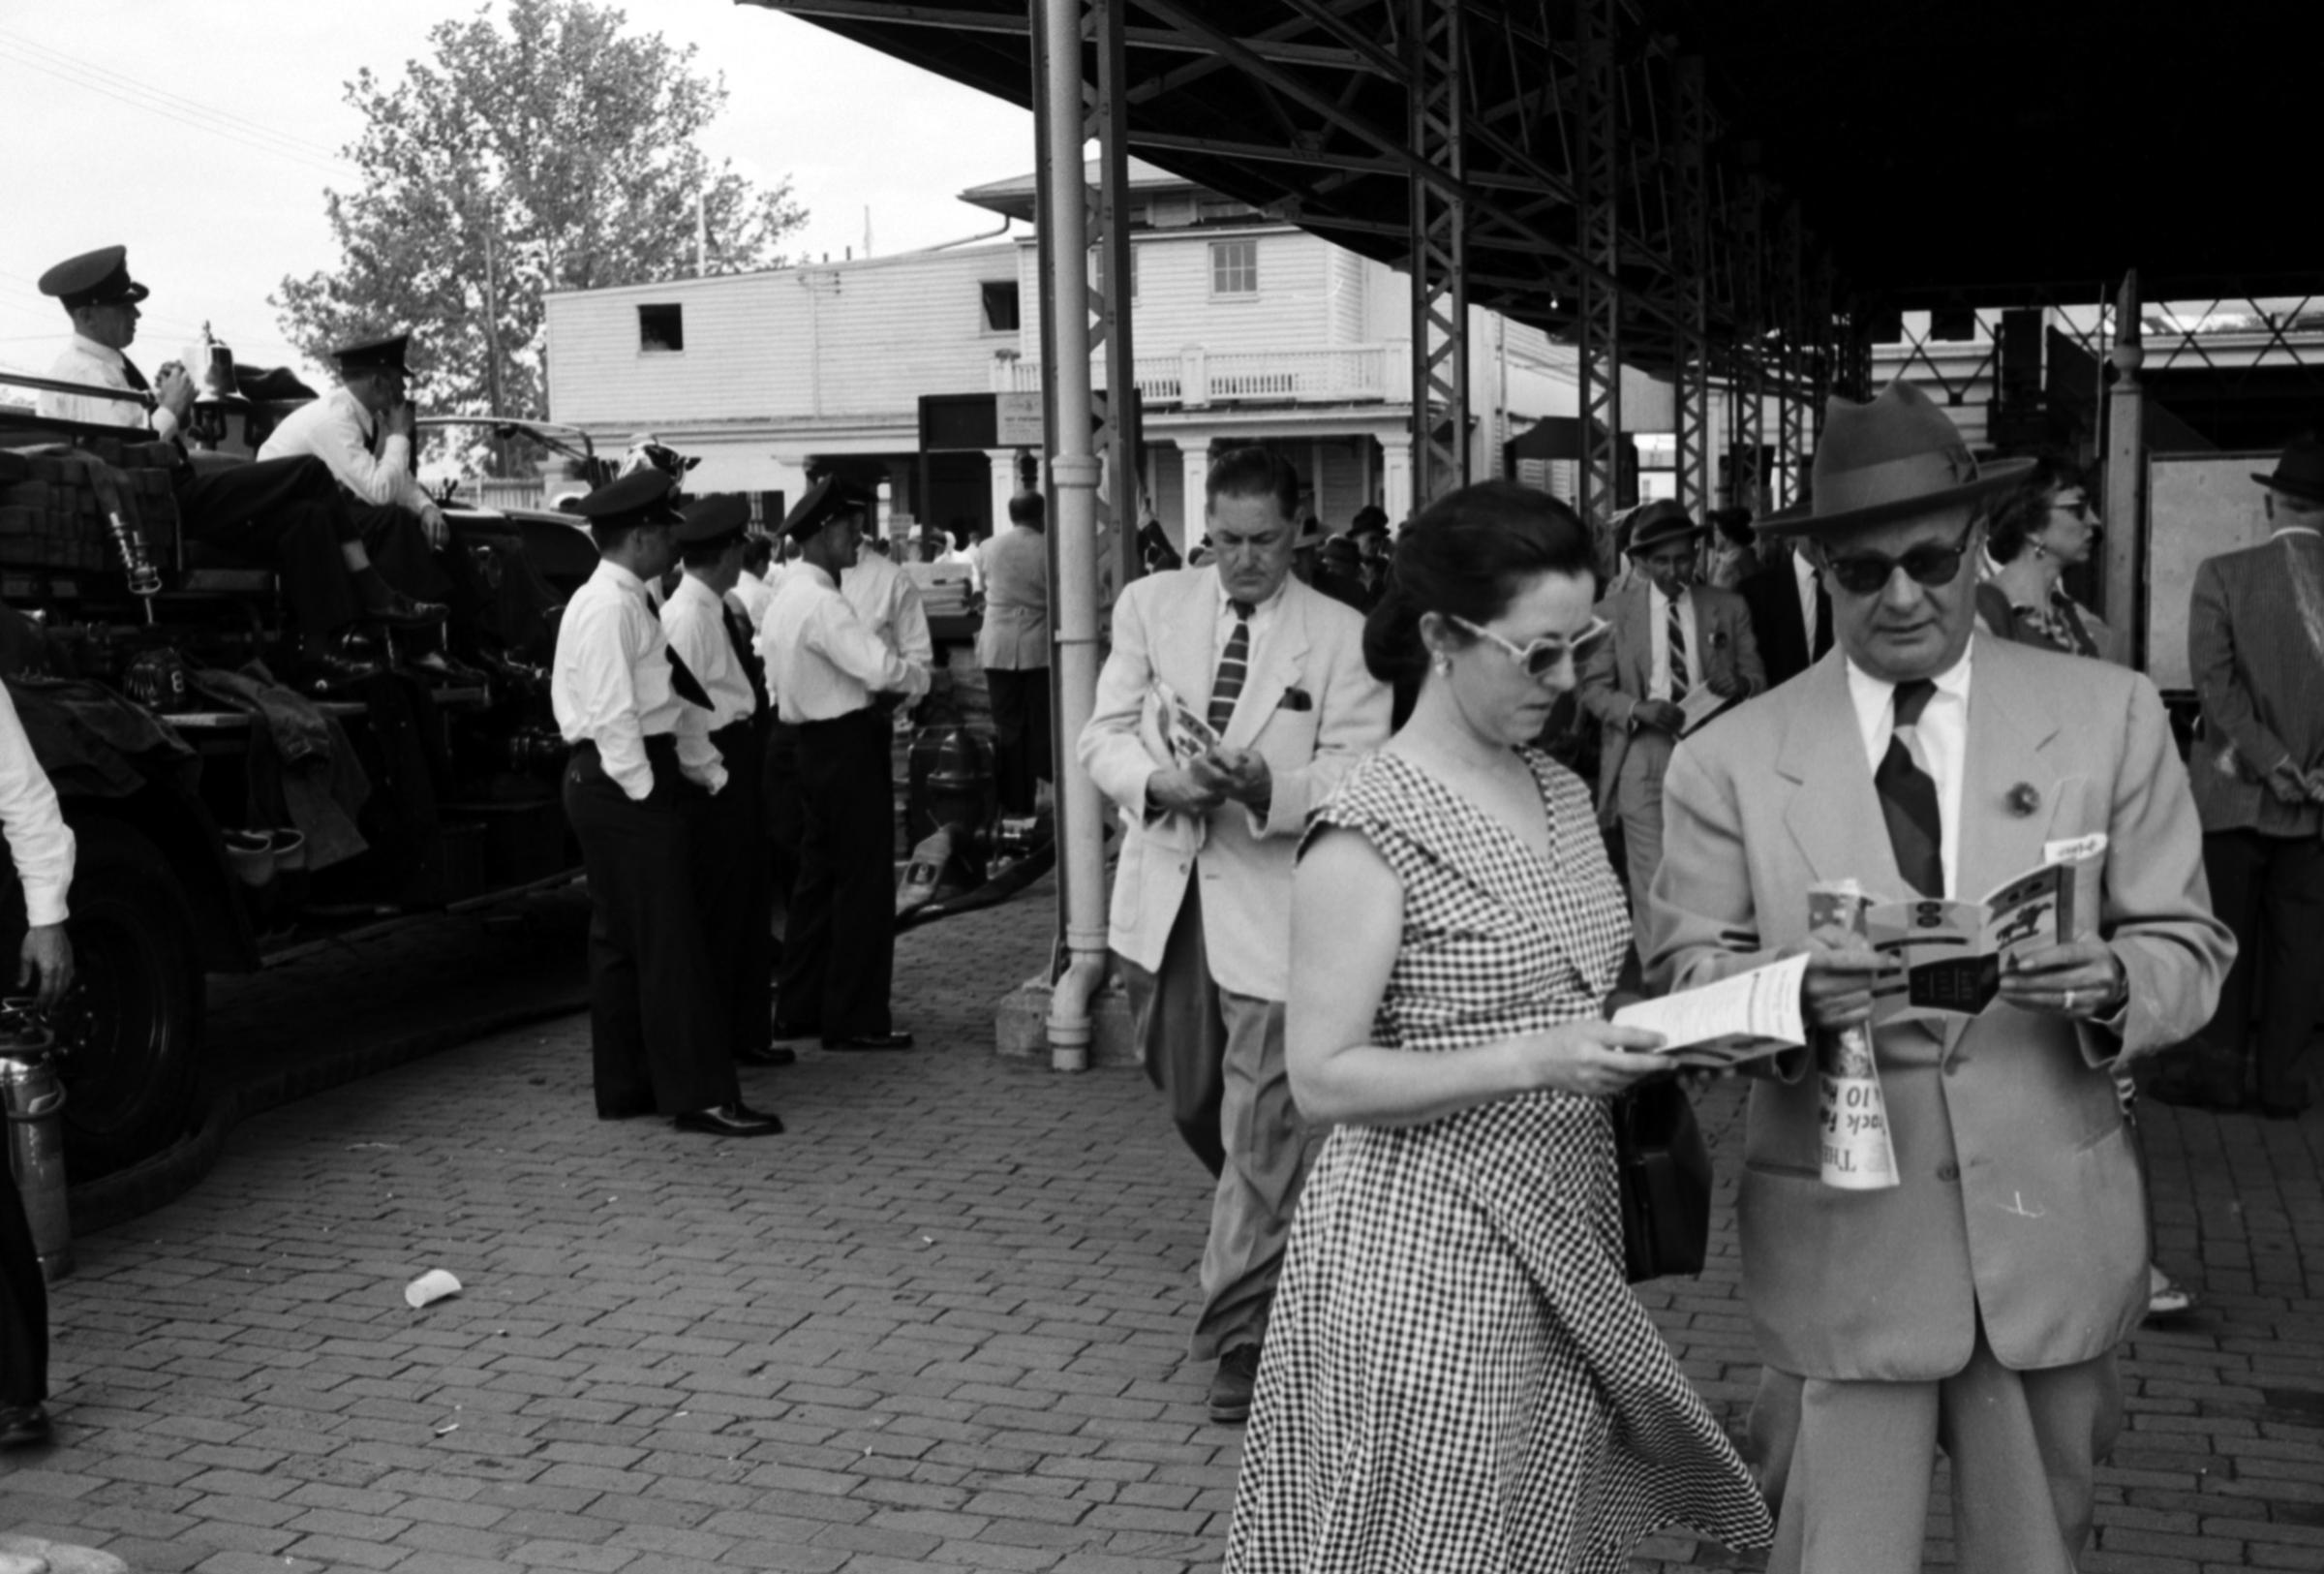 Spectators at Churchill Downs on Kentucky Derby day, 1955.